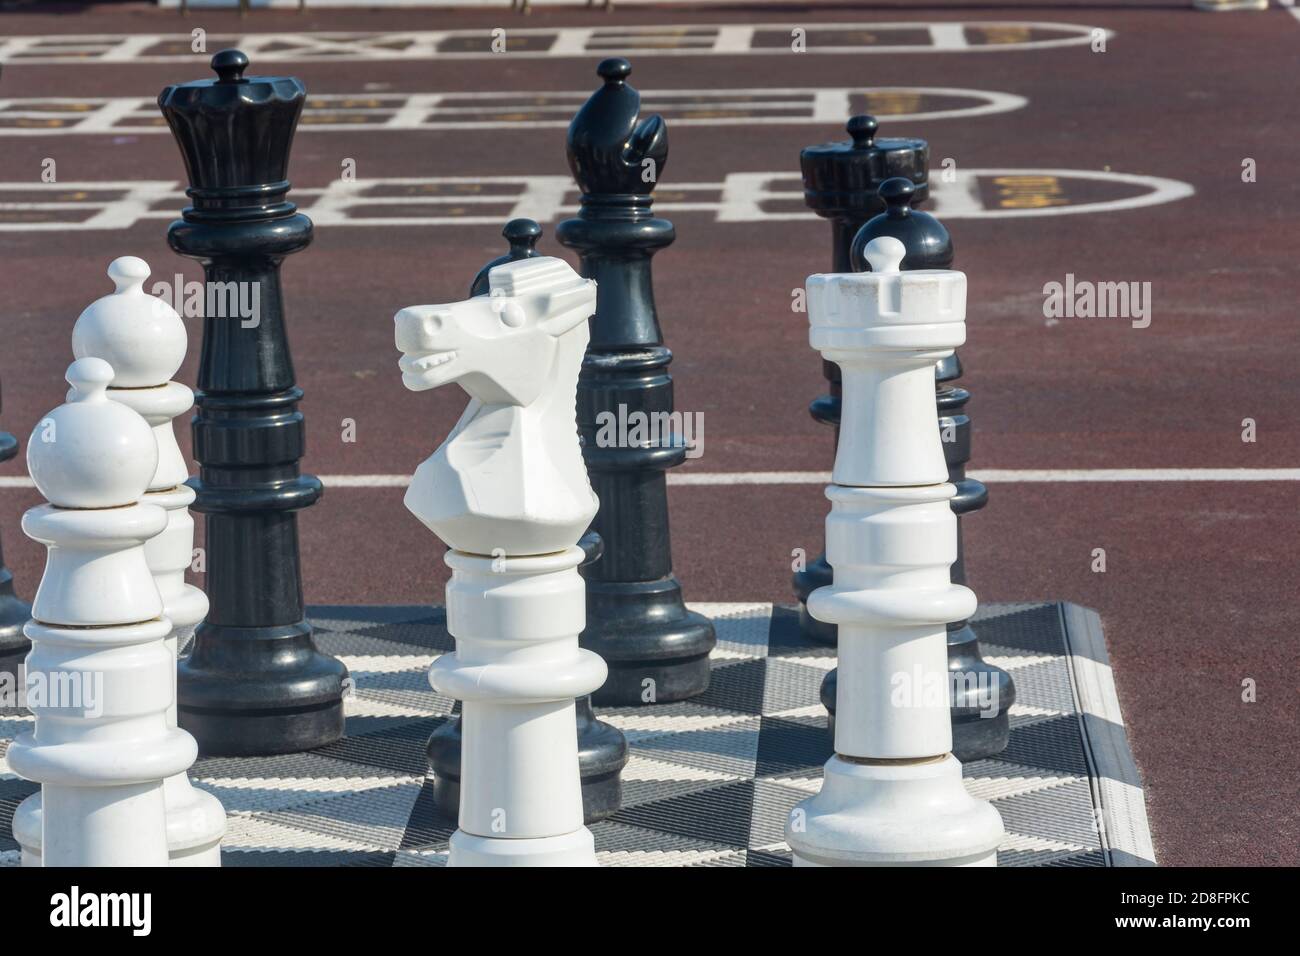 Big chess in park on chessboard. Giant pieces of white chess knight, black chess king and pawns close-up. Selective focus. Stock Photo